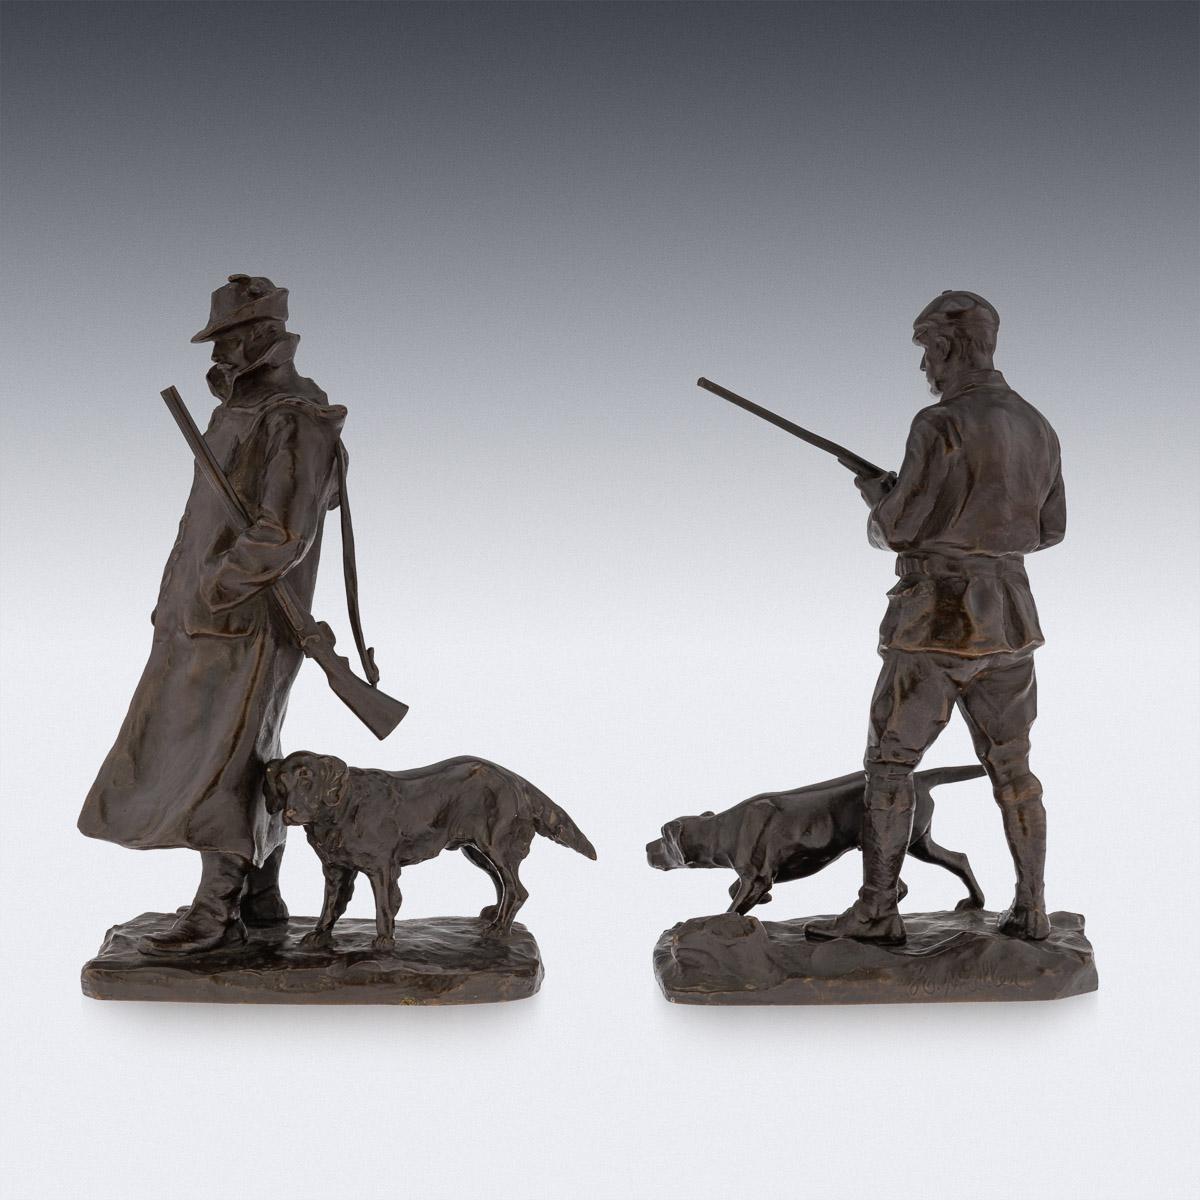 20th Century pair of cast bronze figures of hunters, each with a rifle and a dog by their side. Signed by Hans Müller (Austrian, 1873-1937), a pupil of the renowned sculptor Edmund Hellmmer at the Vienna Academy of Art.

CONDITION
In Great